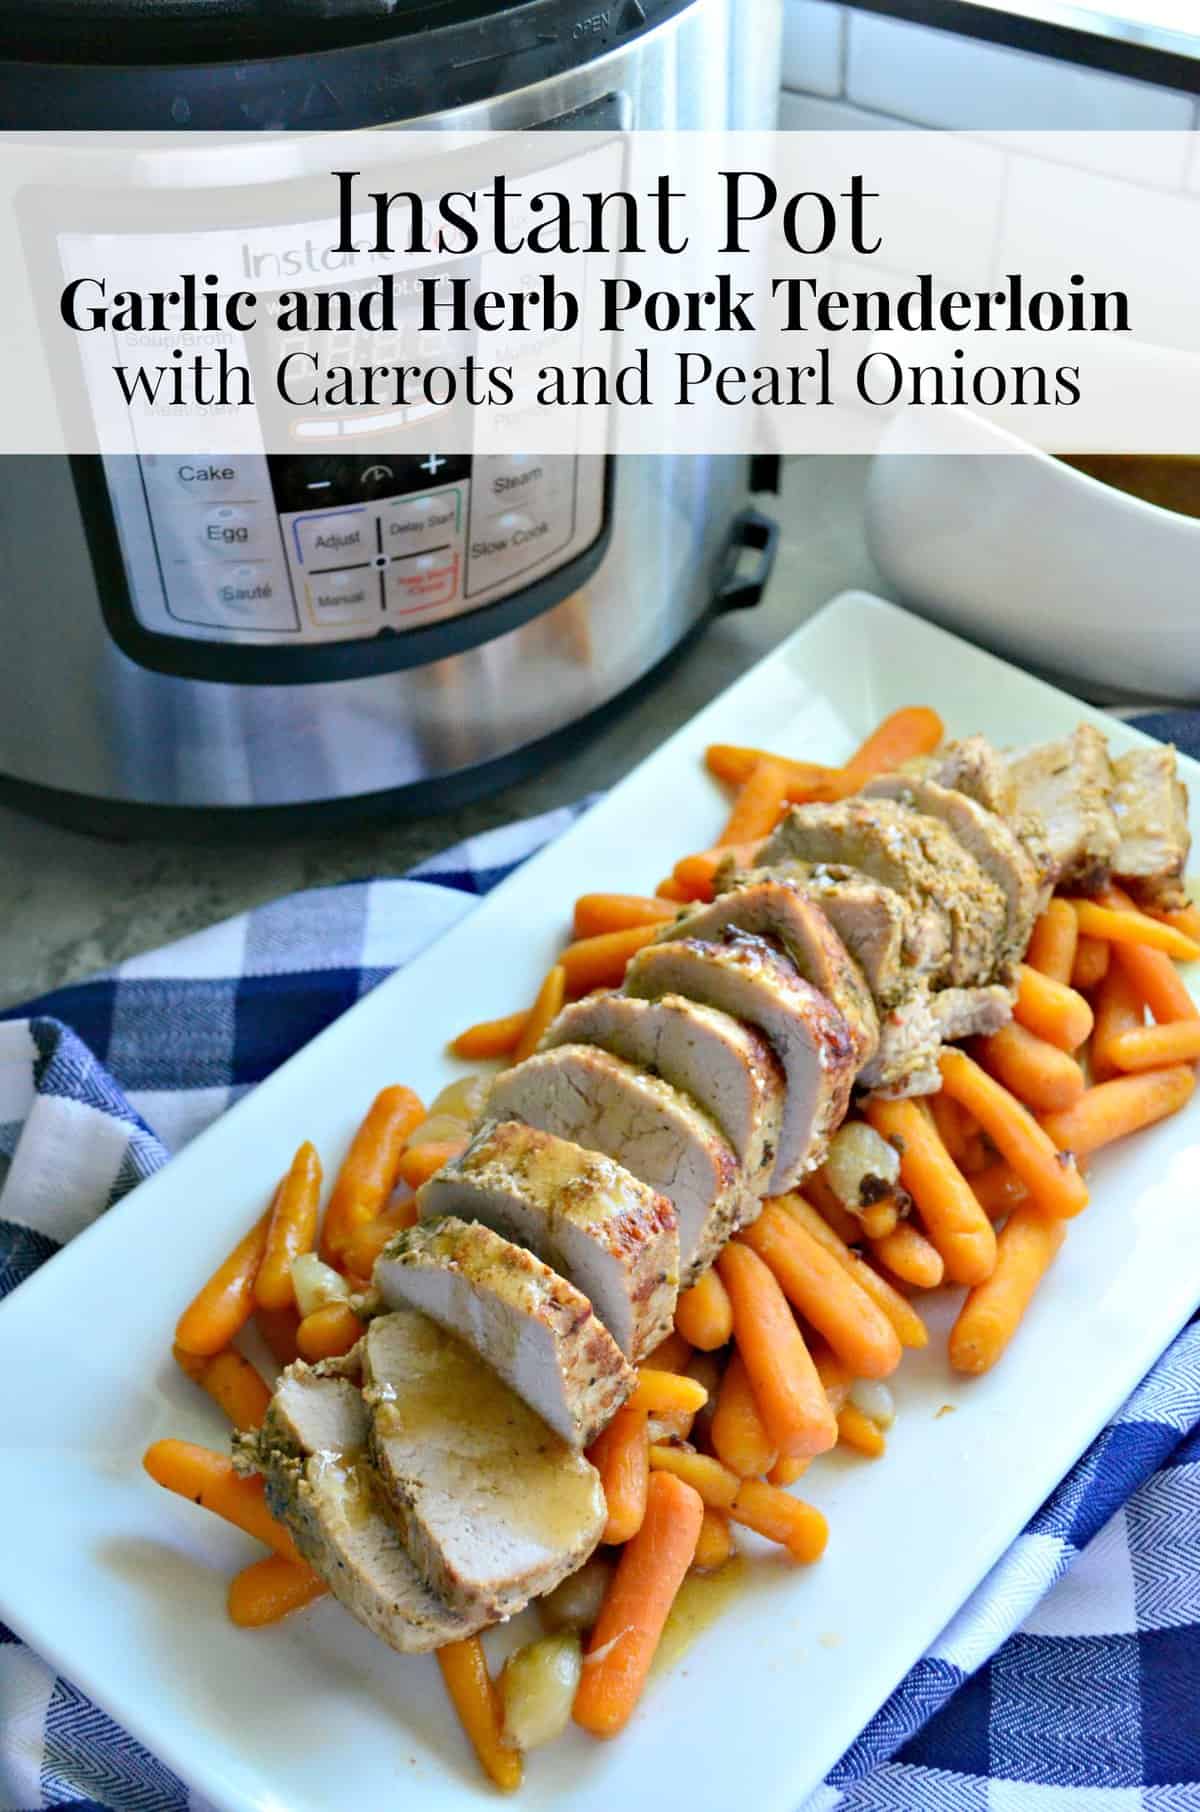 Garlic and Herb Pork Tenderloin with Carrots and Pearl Onions on platter with title text.